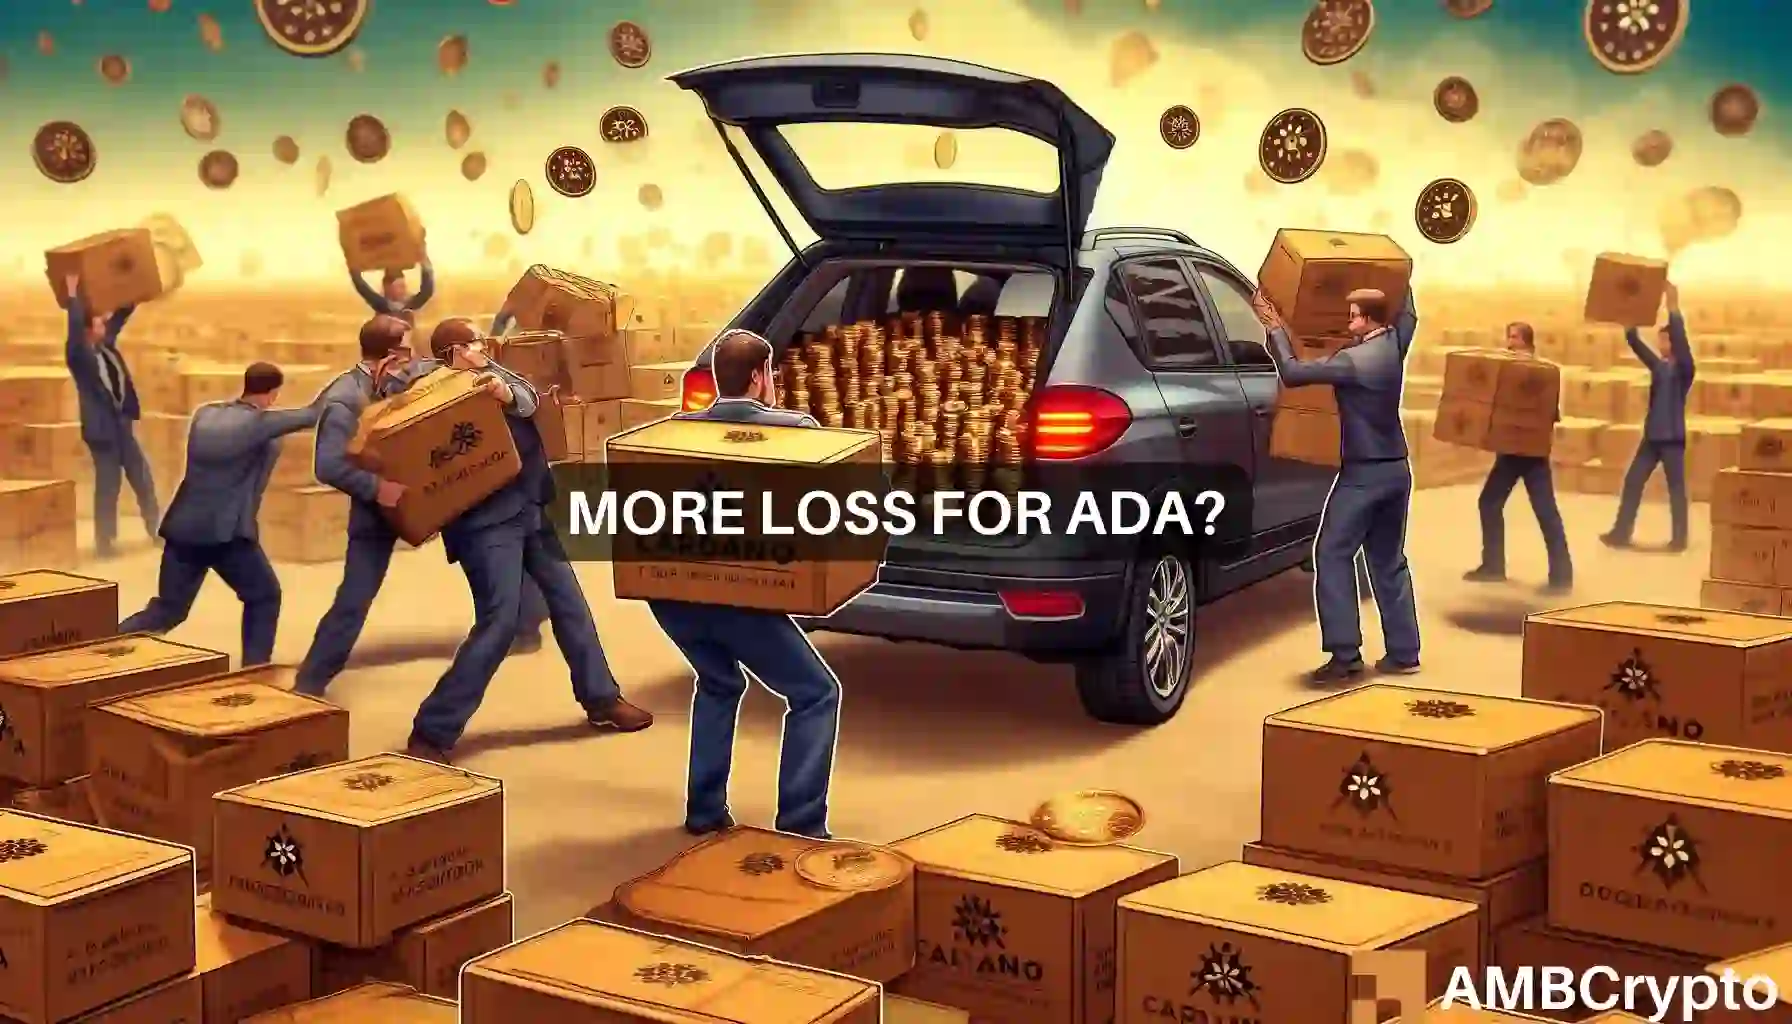 Cardano’s price loss – Is it time to scoop more ADA?